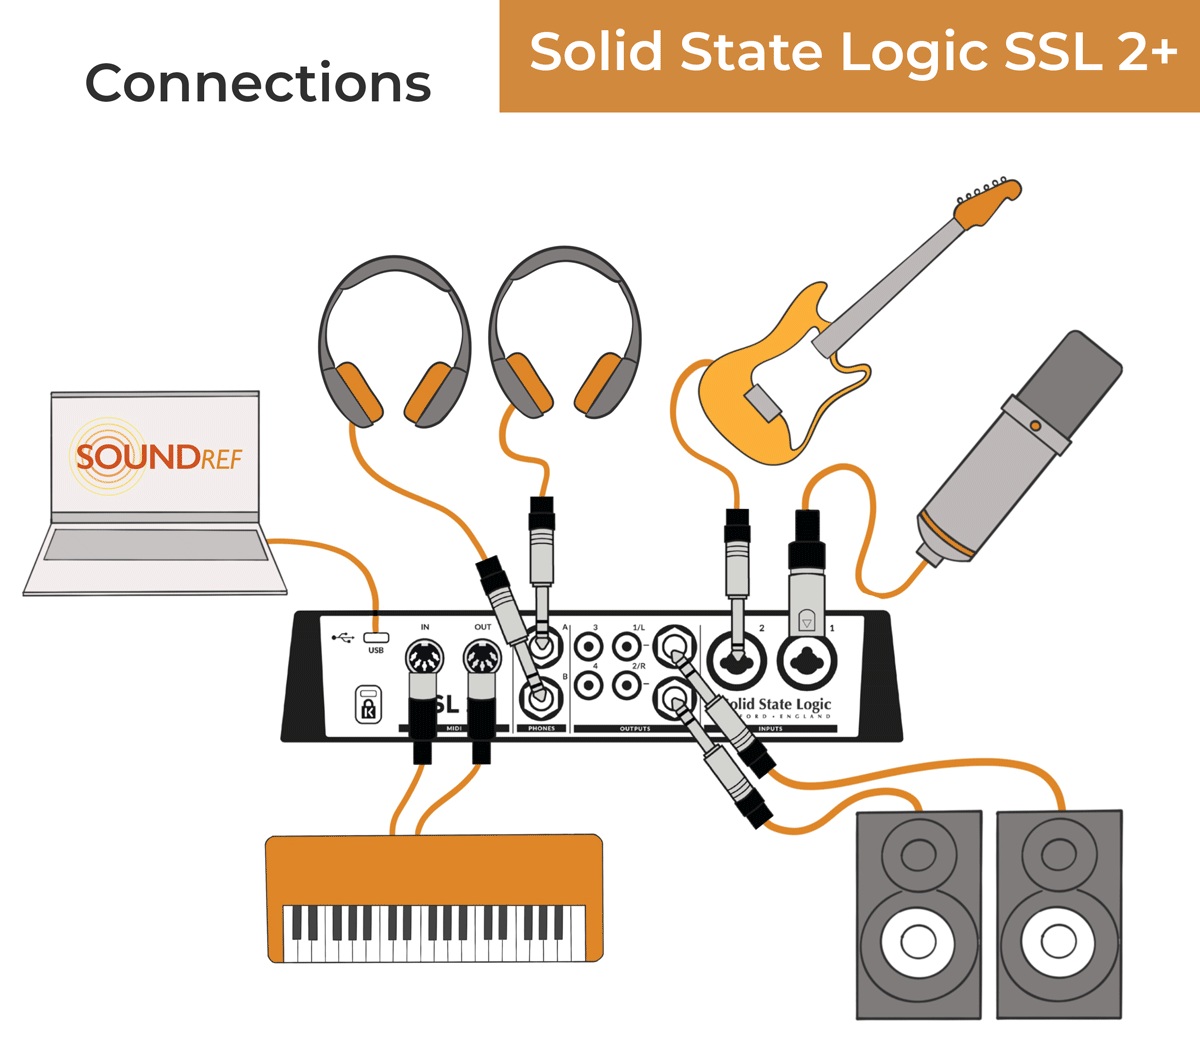 Connecting the SSL 2+ to computer, midi devices, speakers, instruments, headphones and microphone